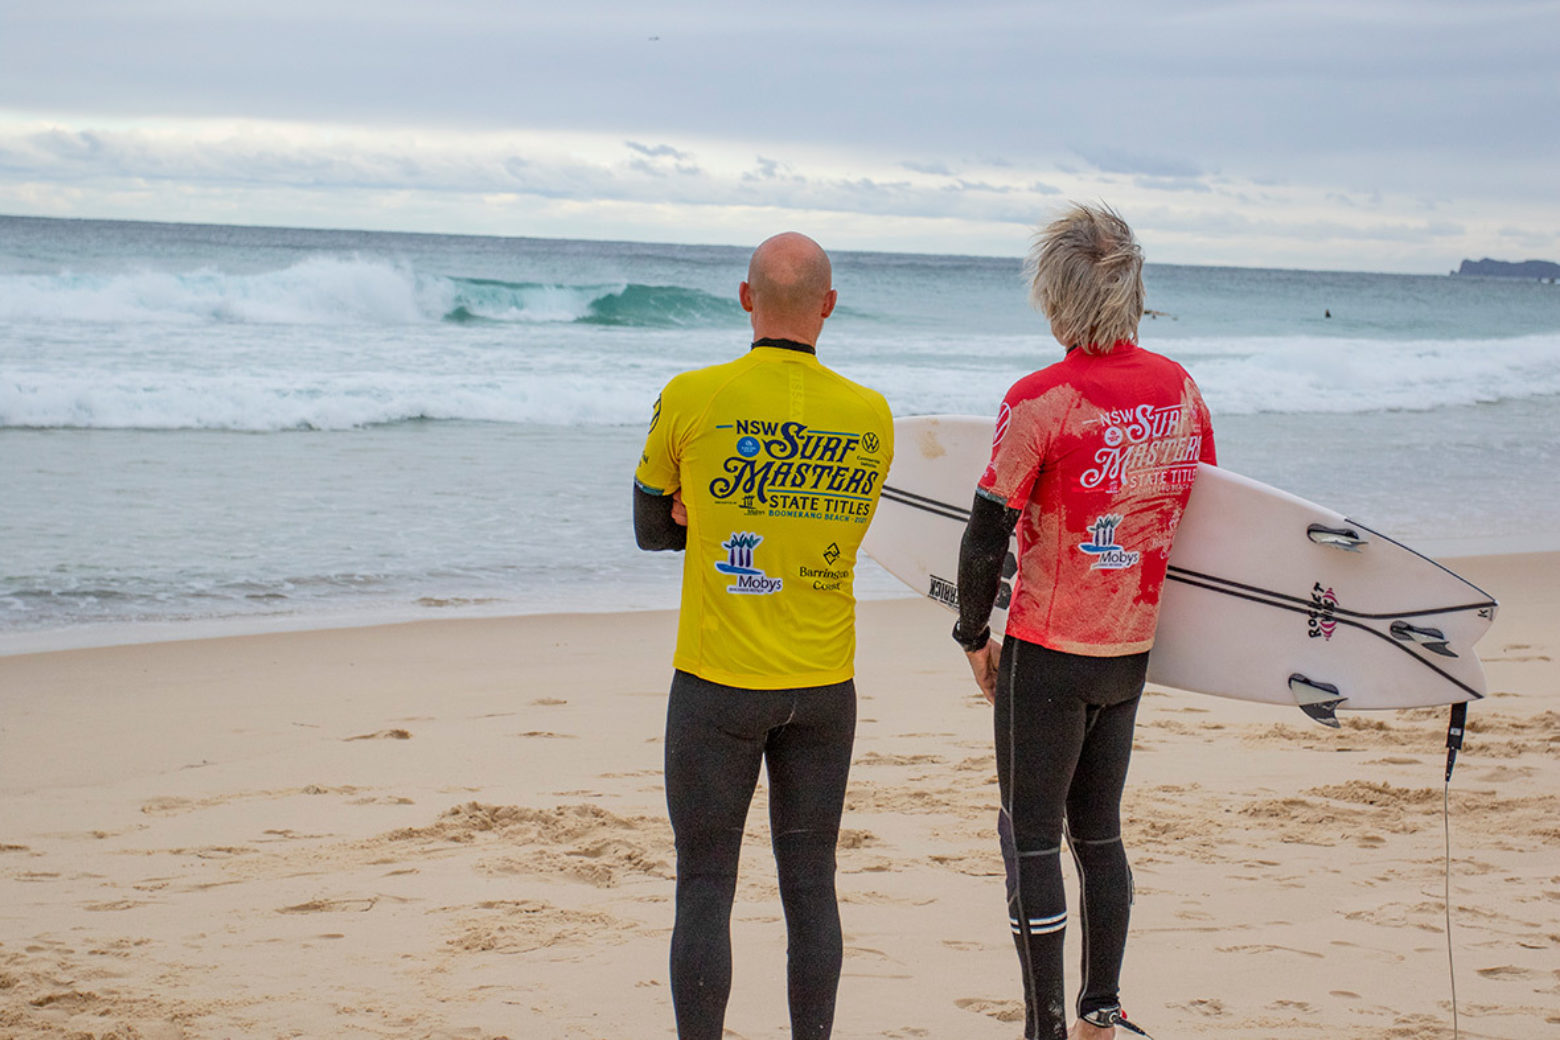 NSW Surfmasters Boomerang Beach with SNSW and @summerofseventyfive